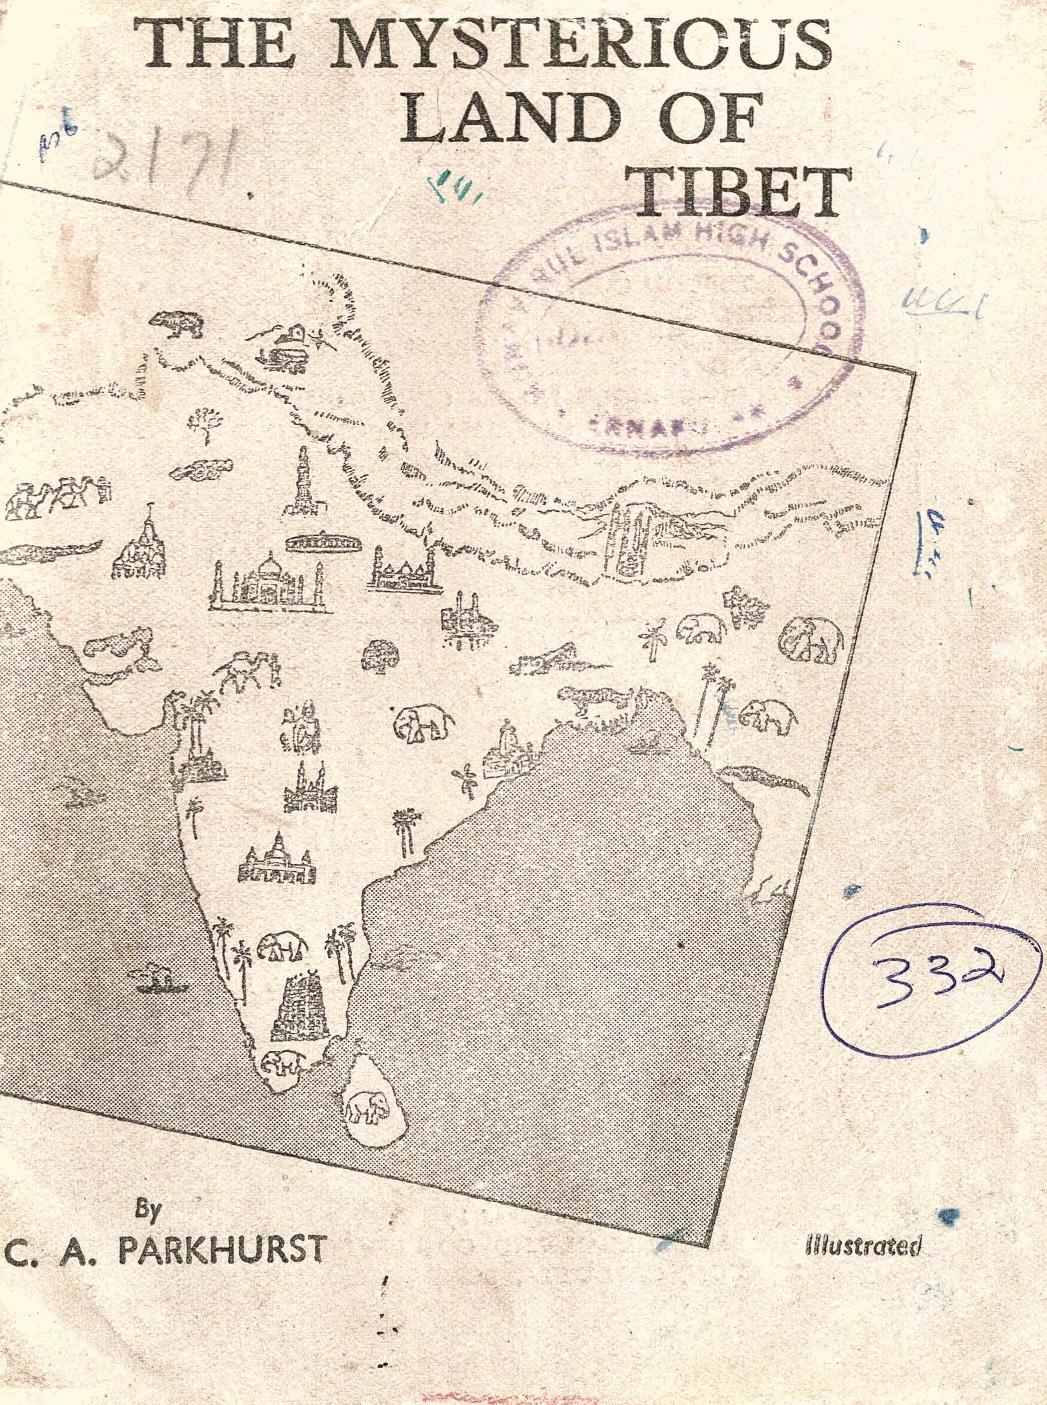  1946 - The Mysterious Land of Tibet - C. A. Parkhurst